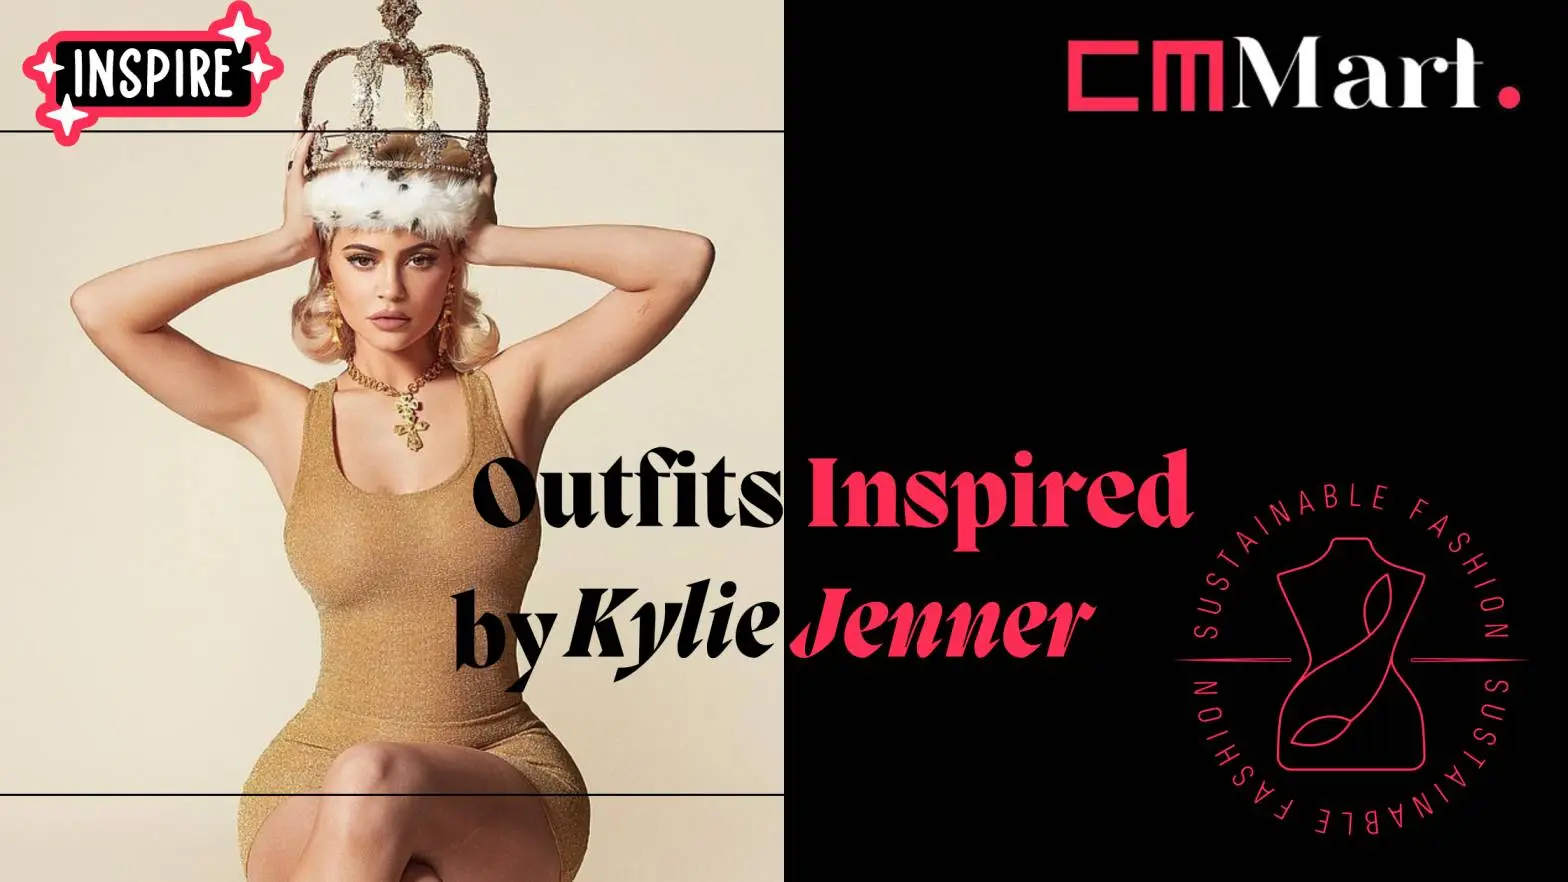 Steal the Look: 10 Trendy & Stylish Outfits Inspired by Kylie Jenner